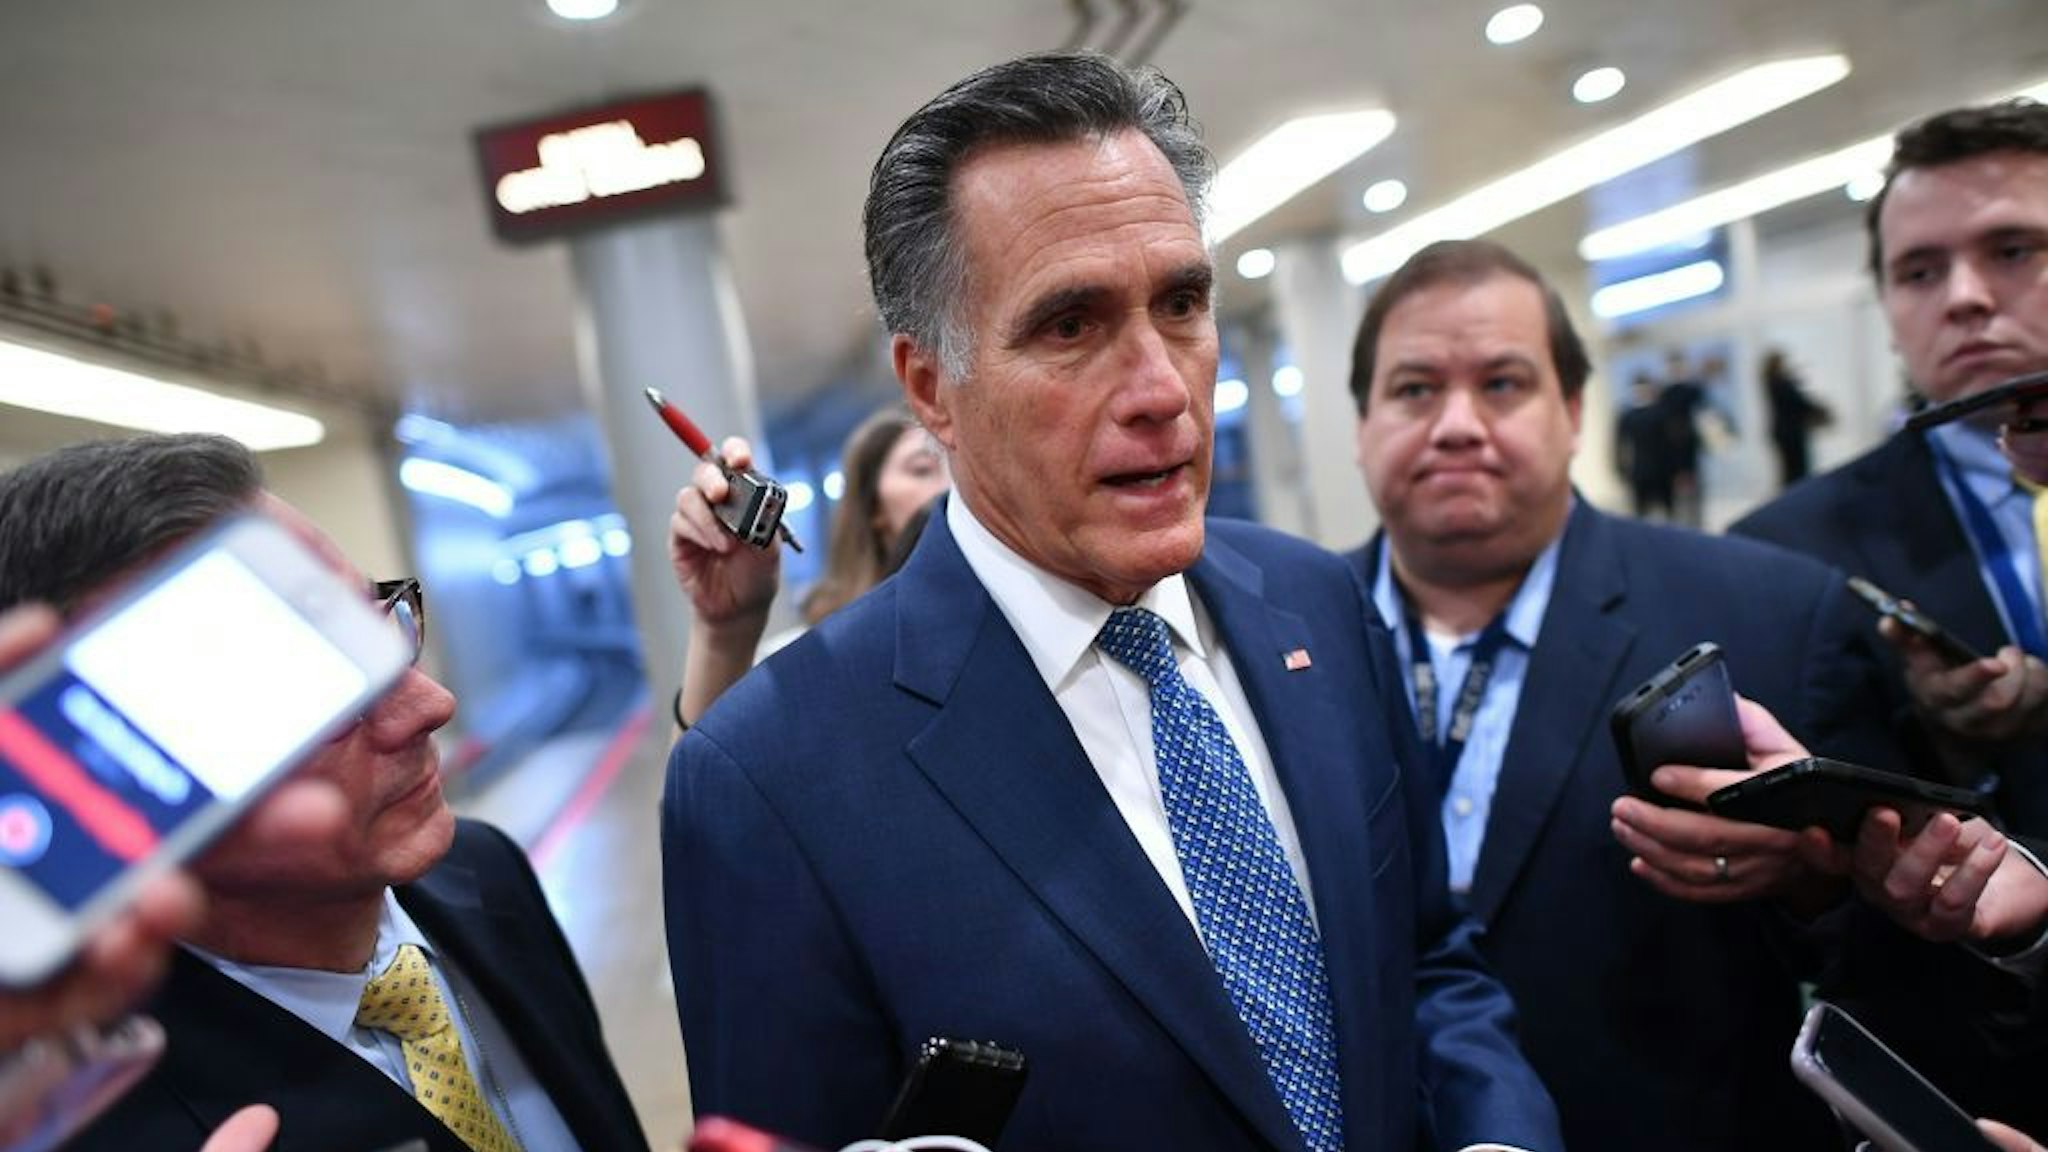 Senator Mitt Romney (R-UT) speaks to the media as he arrives during the impeachment trial of US President Donald Trump on Capitol Hill January 29, 2020, in Washington, DC. - The fight over calling witnesses to testify in President Donald Trump's impeachment trial intensified January 28, 2020 after Trump's lawyers closed their defense calling the abuse of power charges against him politically motivated. Democrats sought to have the Senate subpoena former White House national security advisor John Bolton to provide evidence after leaks from his forthcoming book suggested he could supply damning evidence against Trump. . (Photo by Mandel NGAN / AFP)